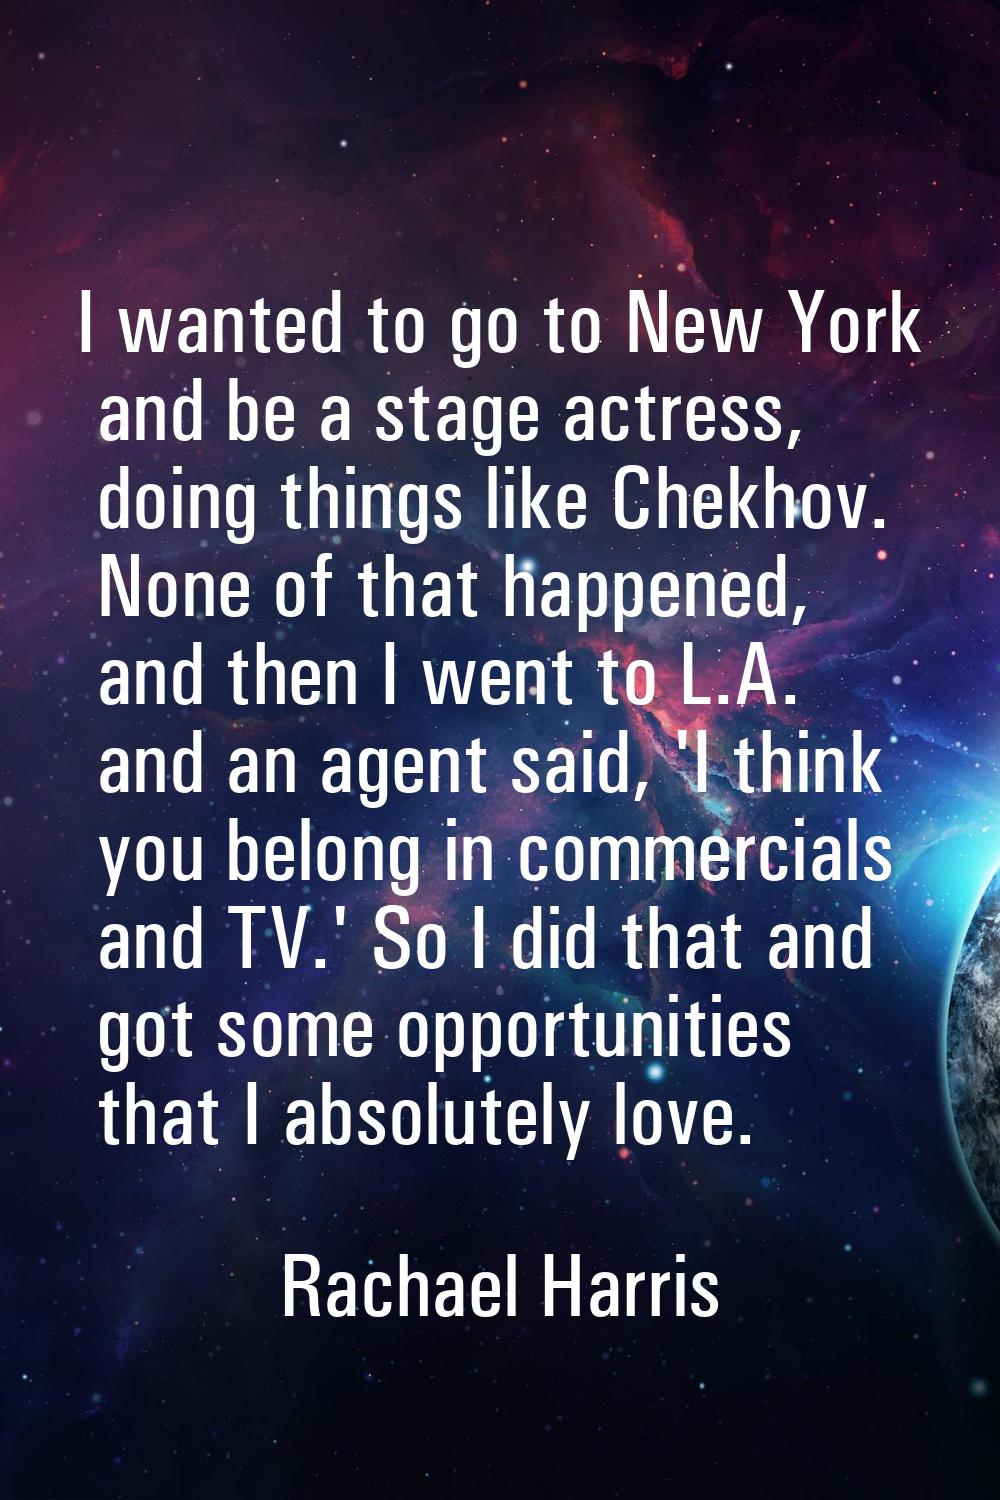 I wanted to go to New York and be a stage actress, doing things like Chekhov. None of that happened